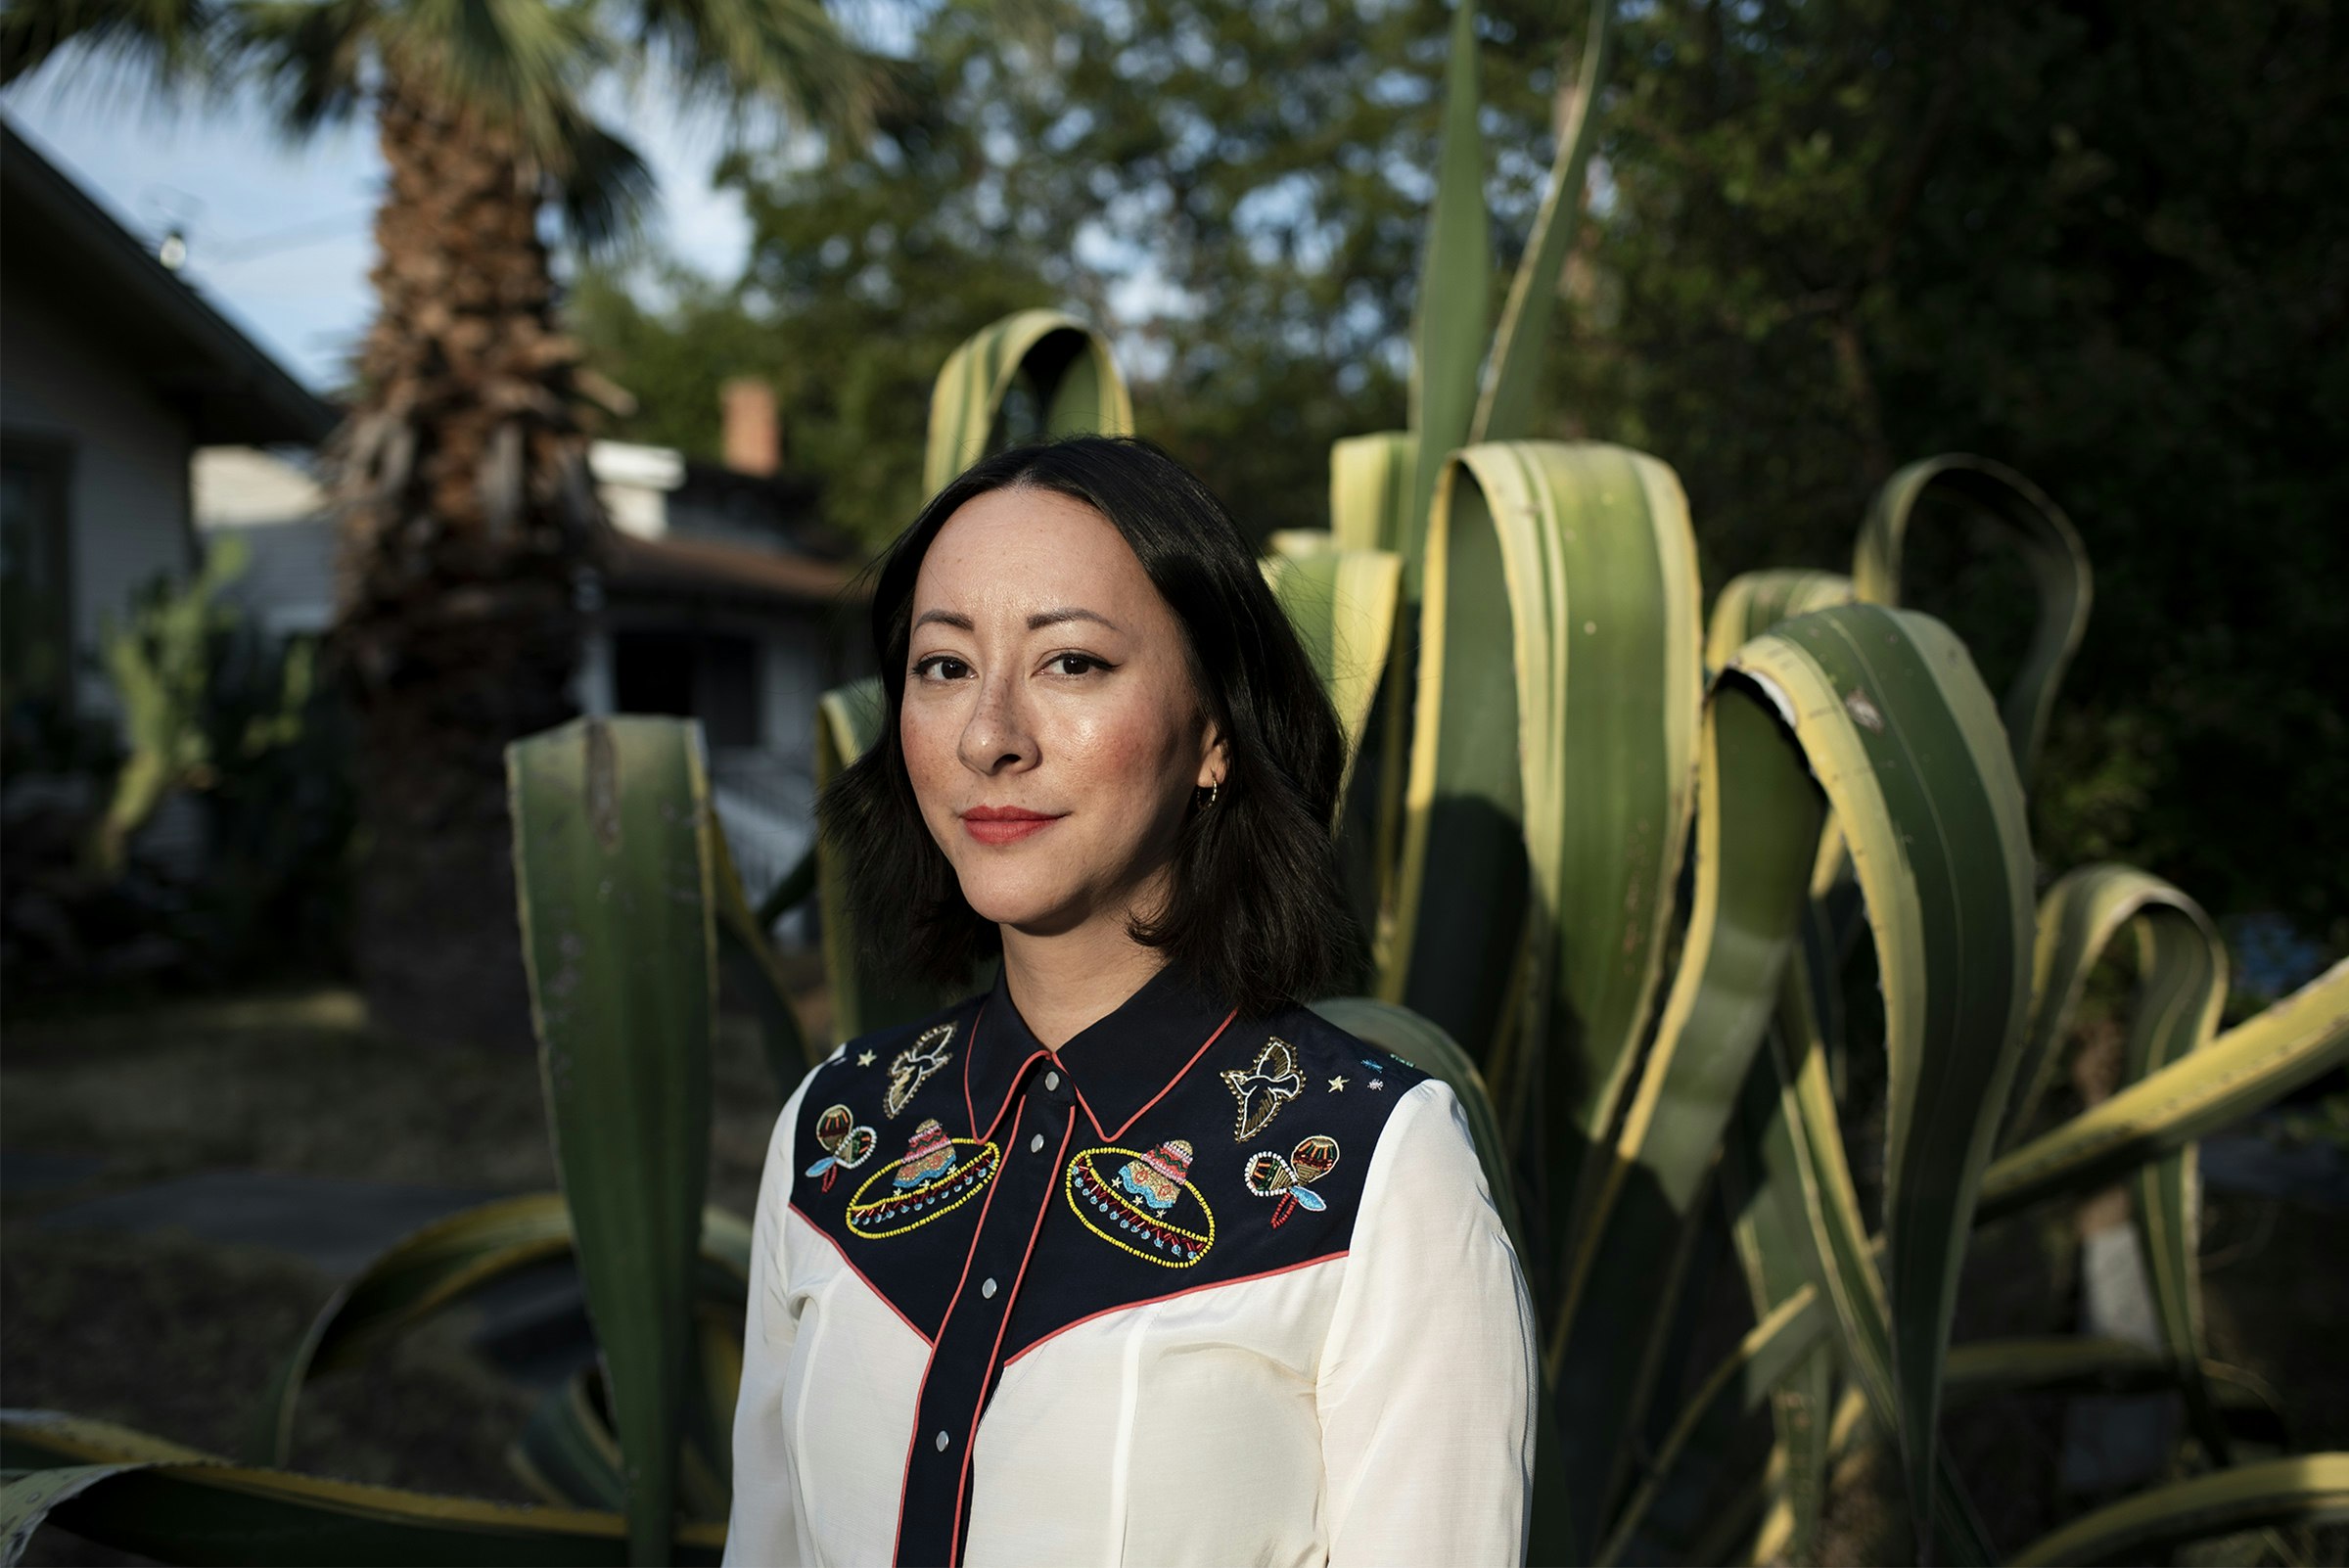 portrait of sun-illuminated person in a white and black embroidered western shirt posed infront of a large cactus in a yard with palm tree in background